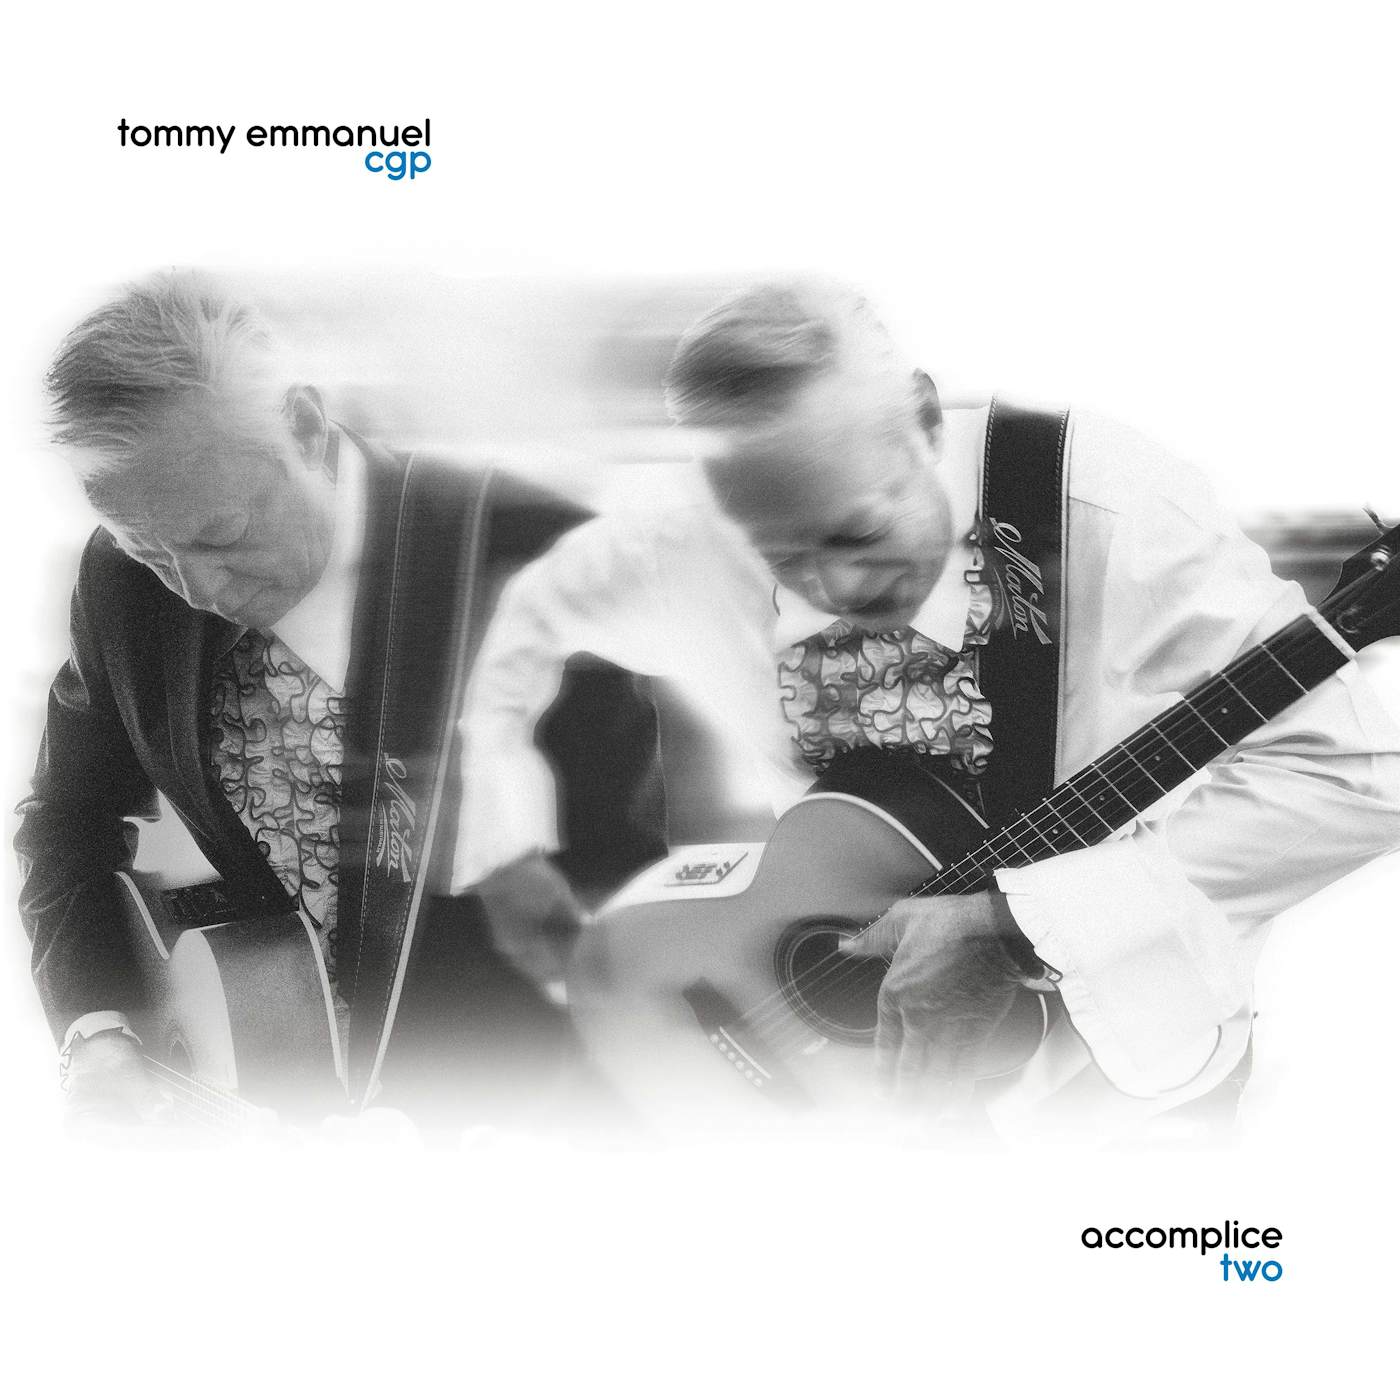 Tommy Emmanuel Accomplice Two Vinyl Record